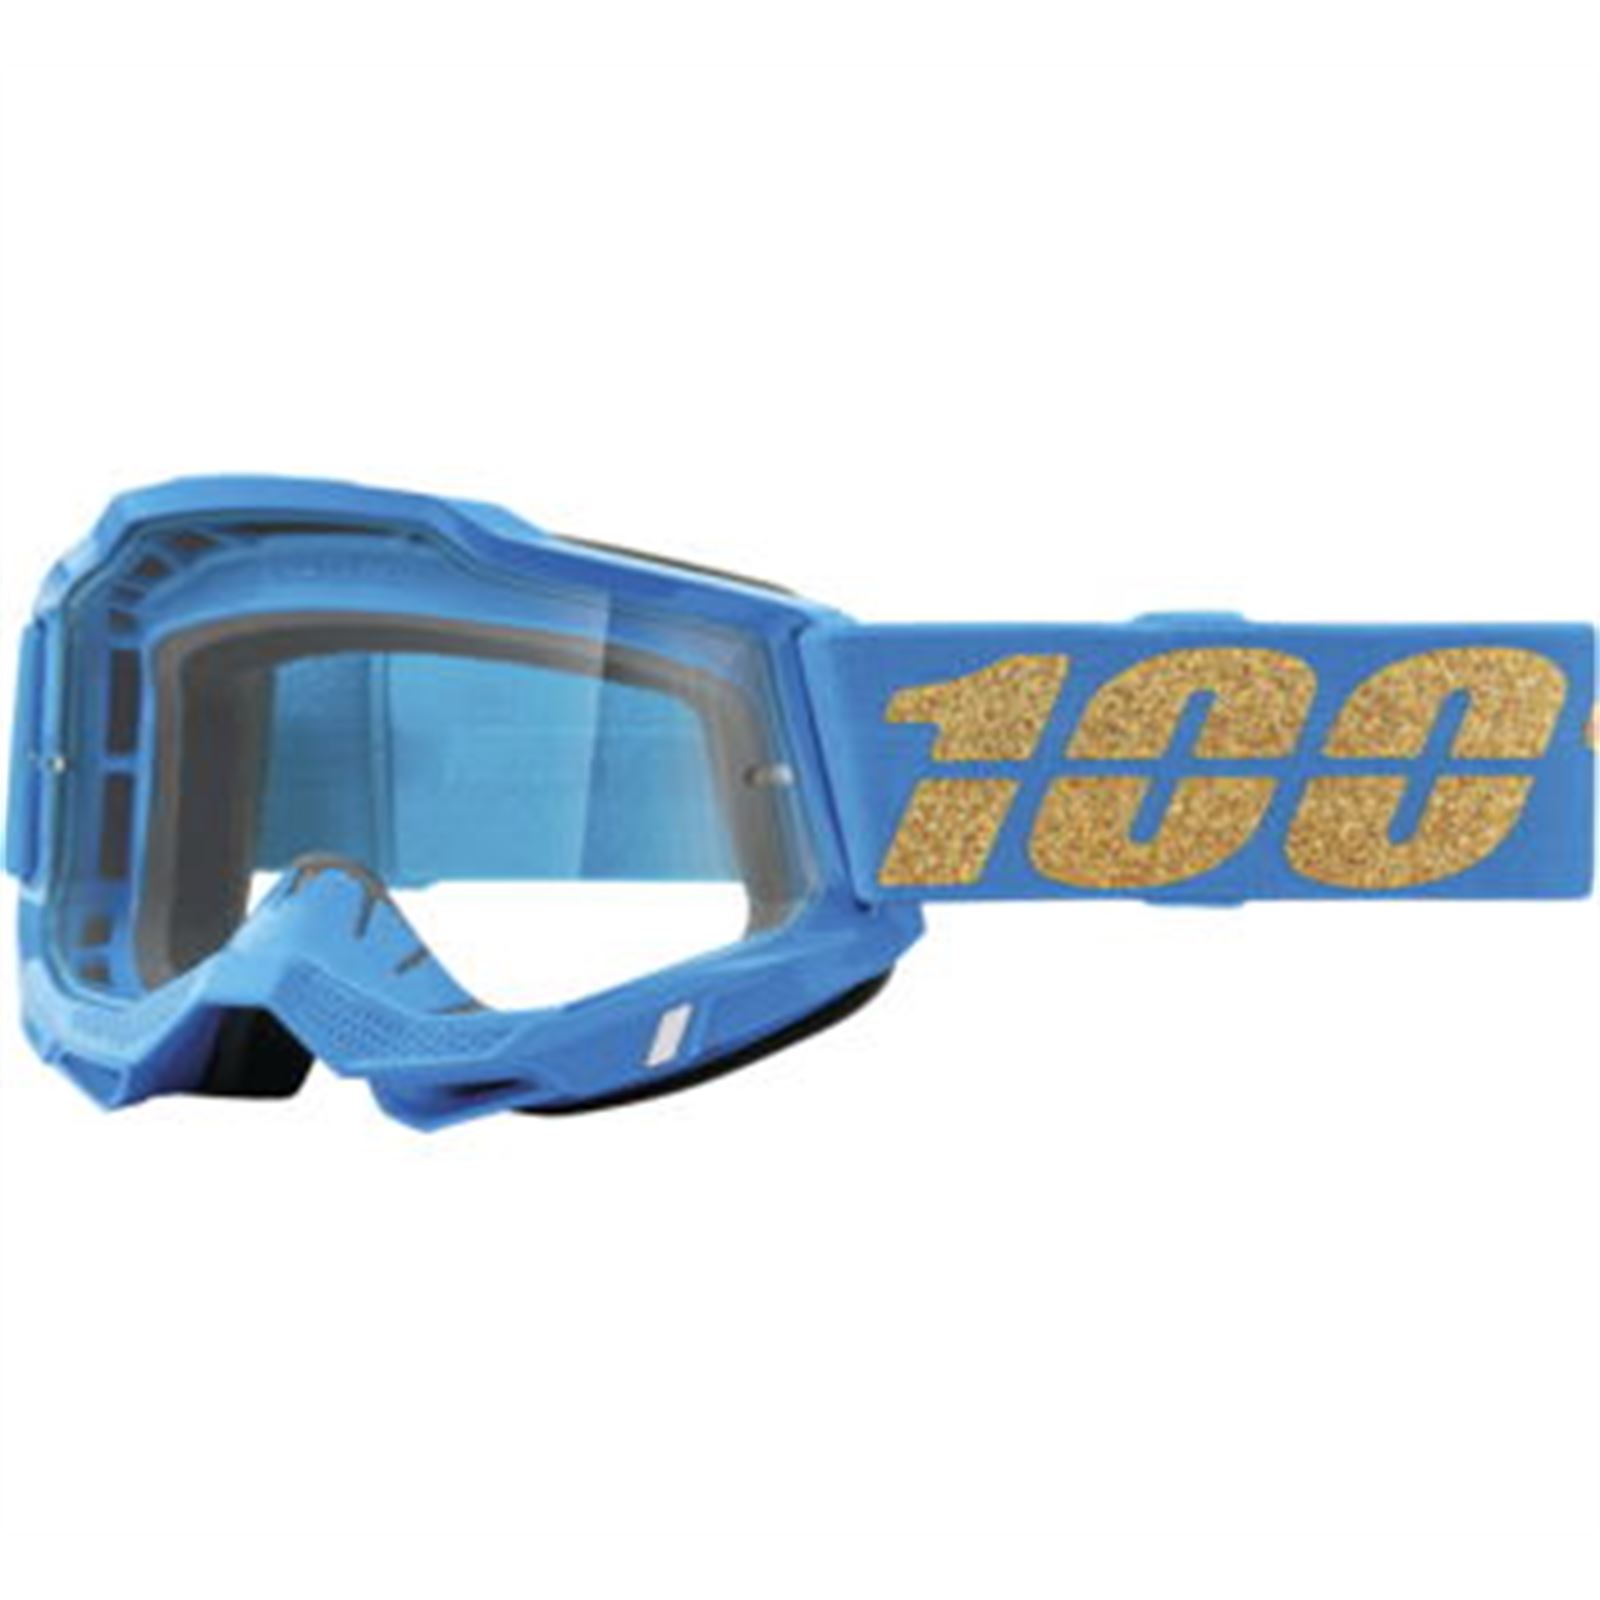 100% Accuri 2 Goggles - Waterloo with Clear Lens